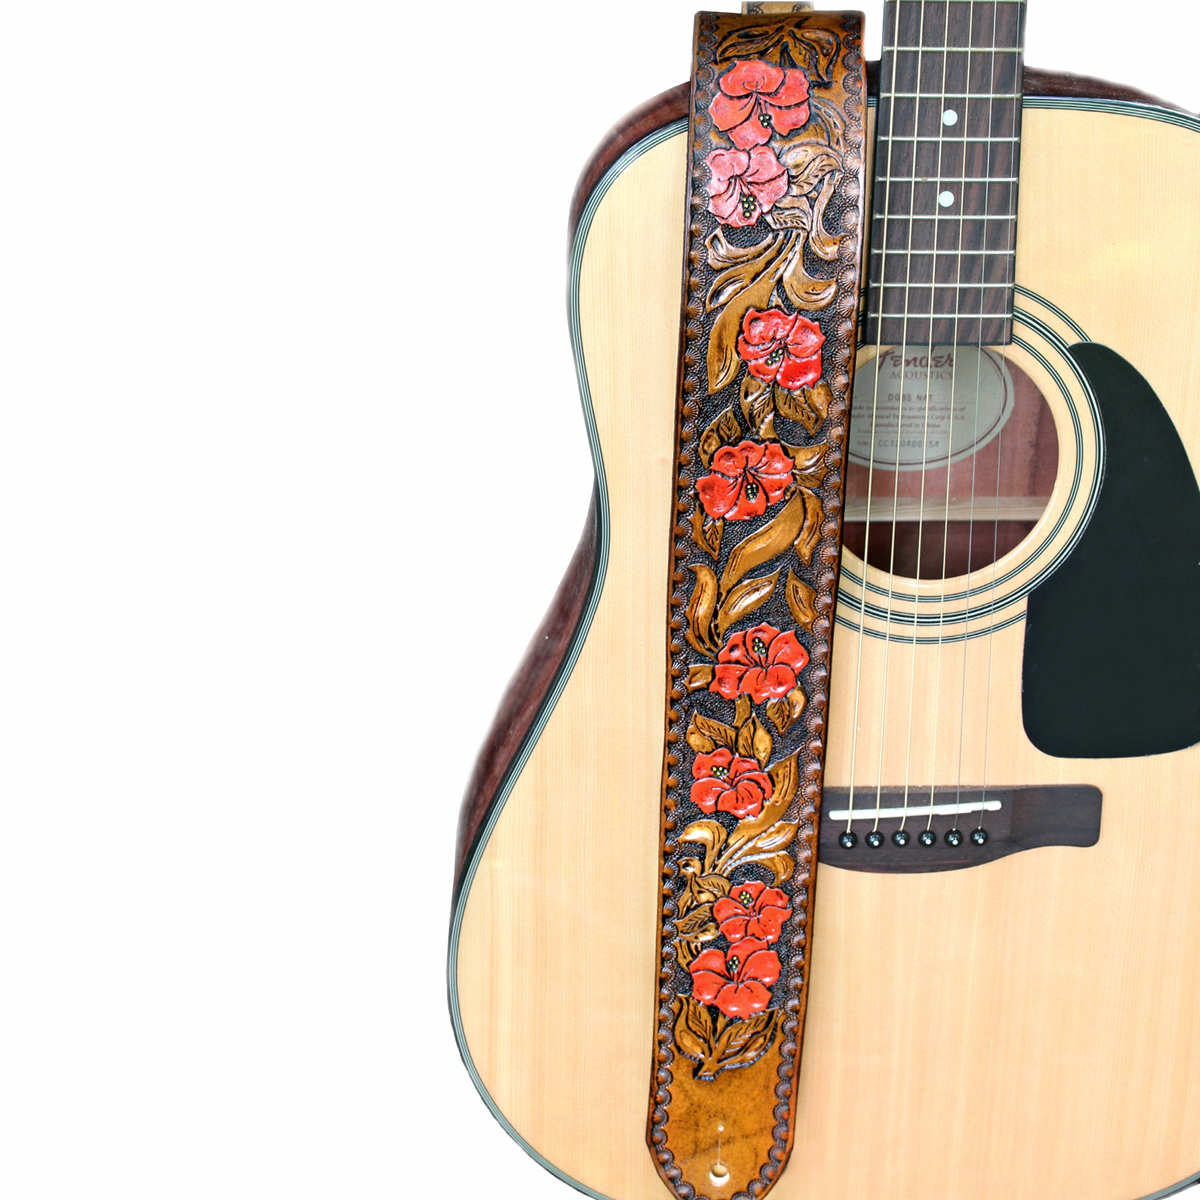 https://theleathersmithy.com/wp-content/uploads/2020/07/red-orange-hibiscus-flower-hand-tooled-leather-guitar-strap-the-leather-smithy_WEB1.jpg